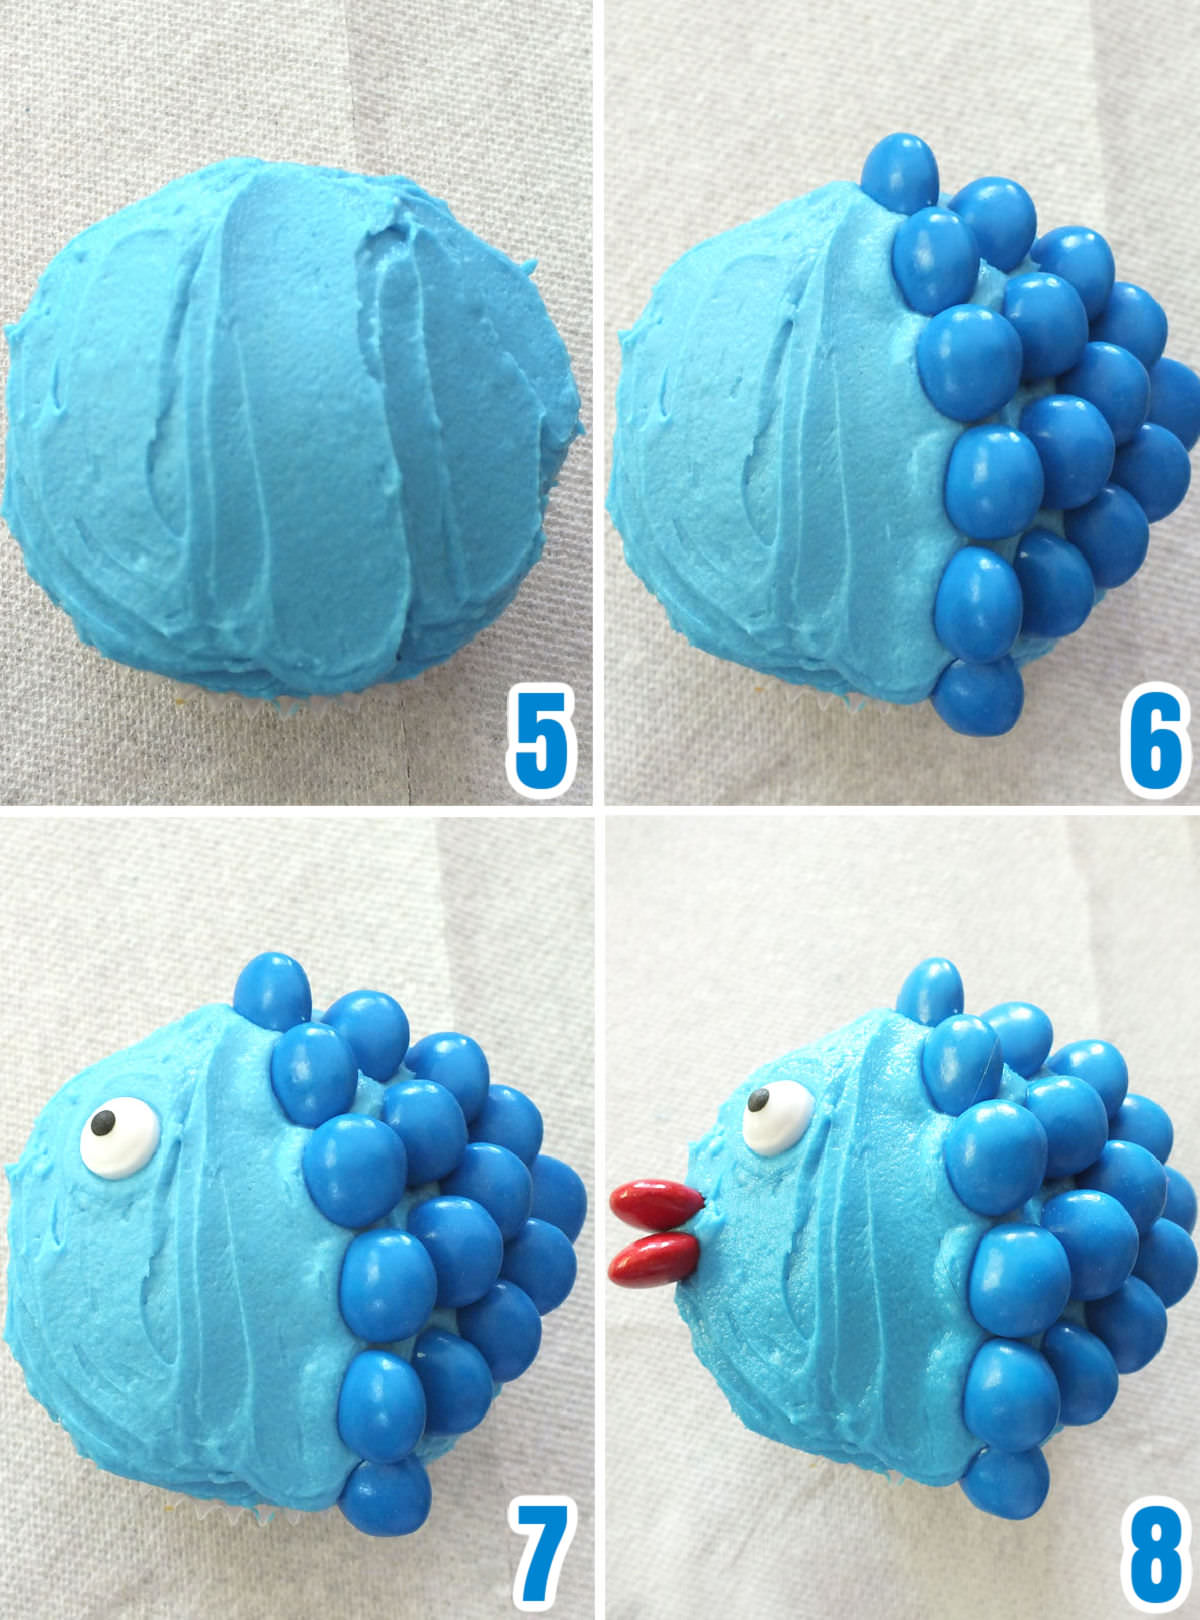 Collage image showing how to turn a cupcake into a fish using M&M's.